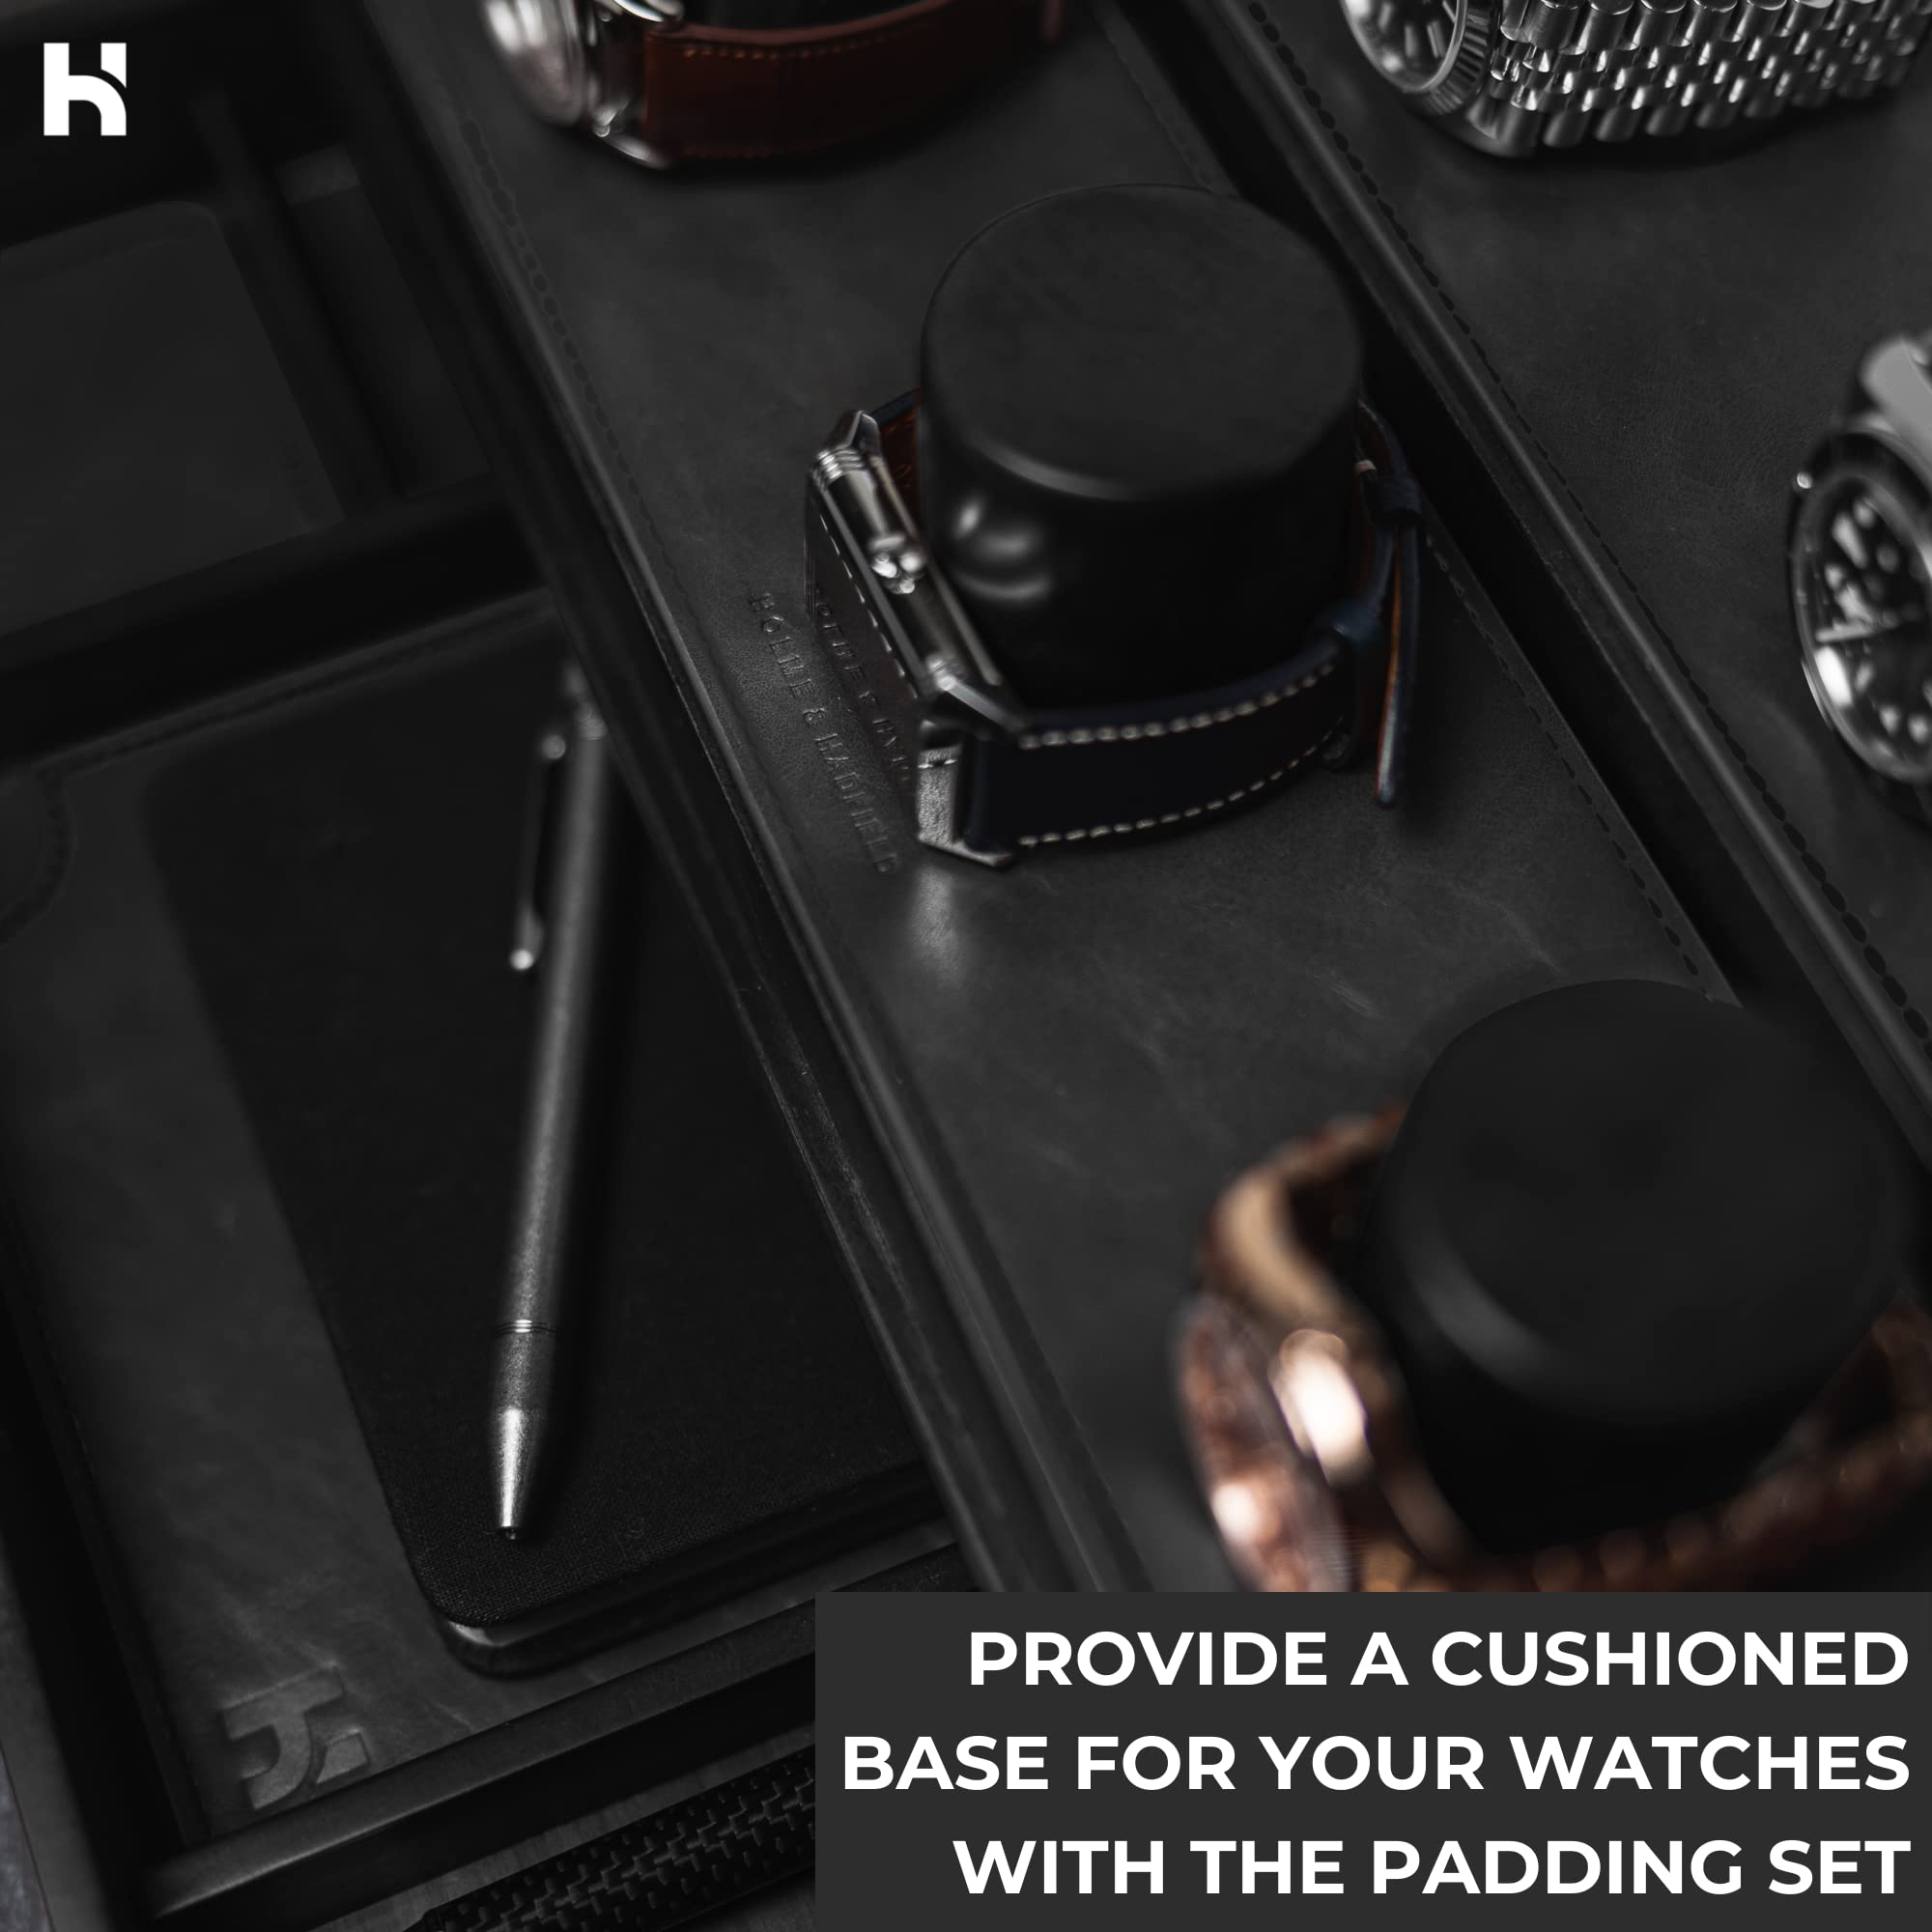 Watch Display Case with Vegan Leather Padding for Enhanced Protection - Sleek Black Wood Watch Holder to Show Off Watches - Watch Box for Men - Watch Display Case for Men - Mens Watch Case